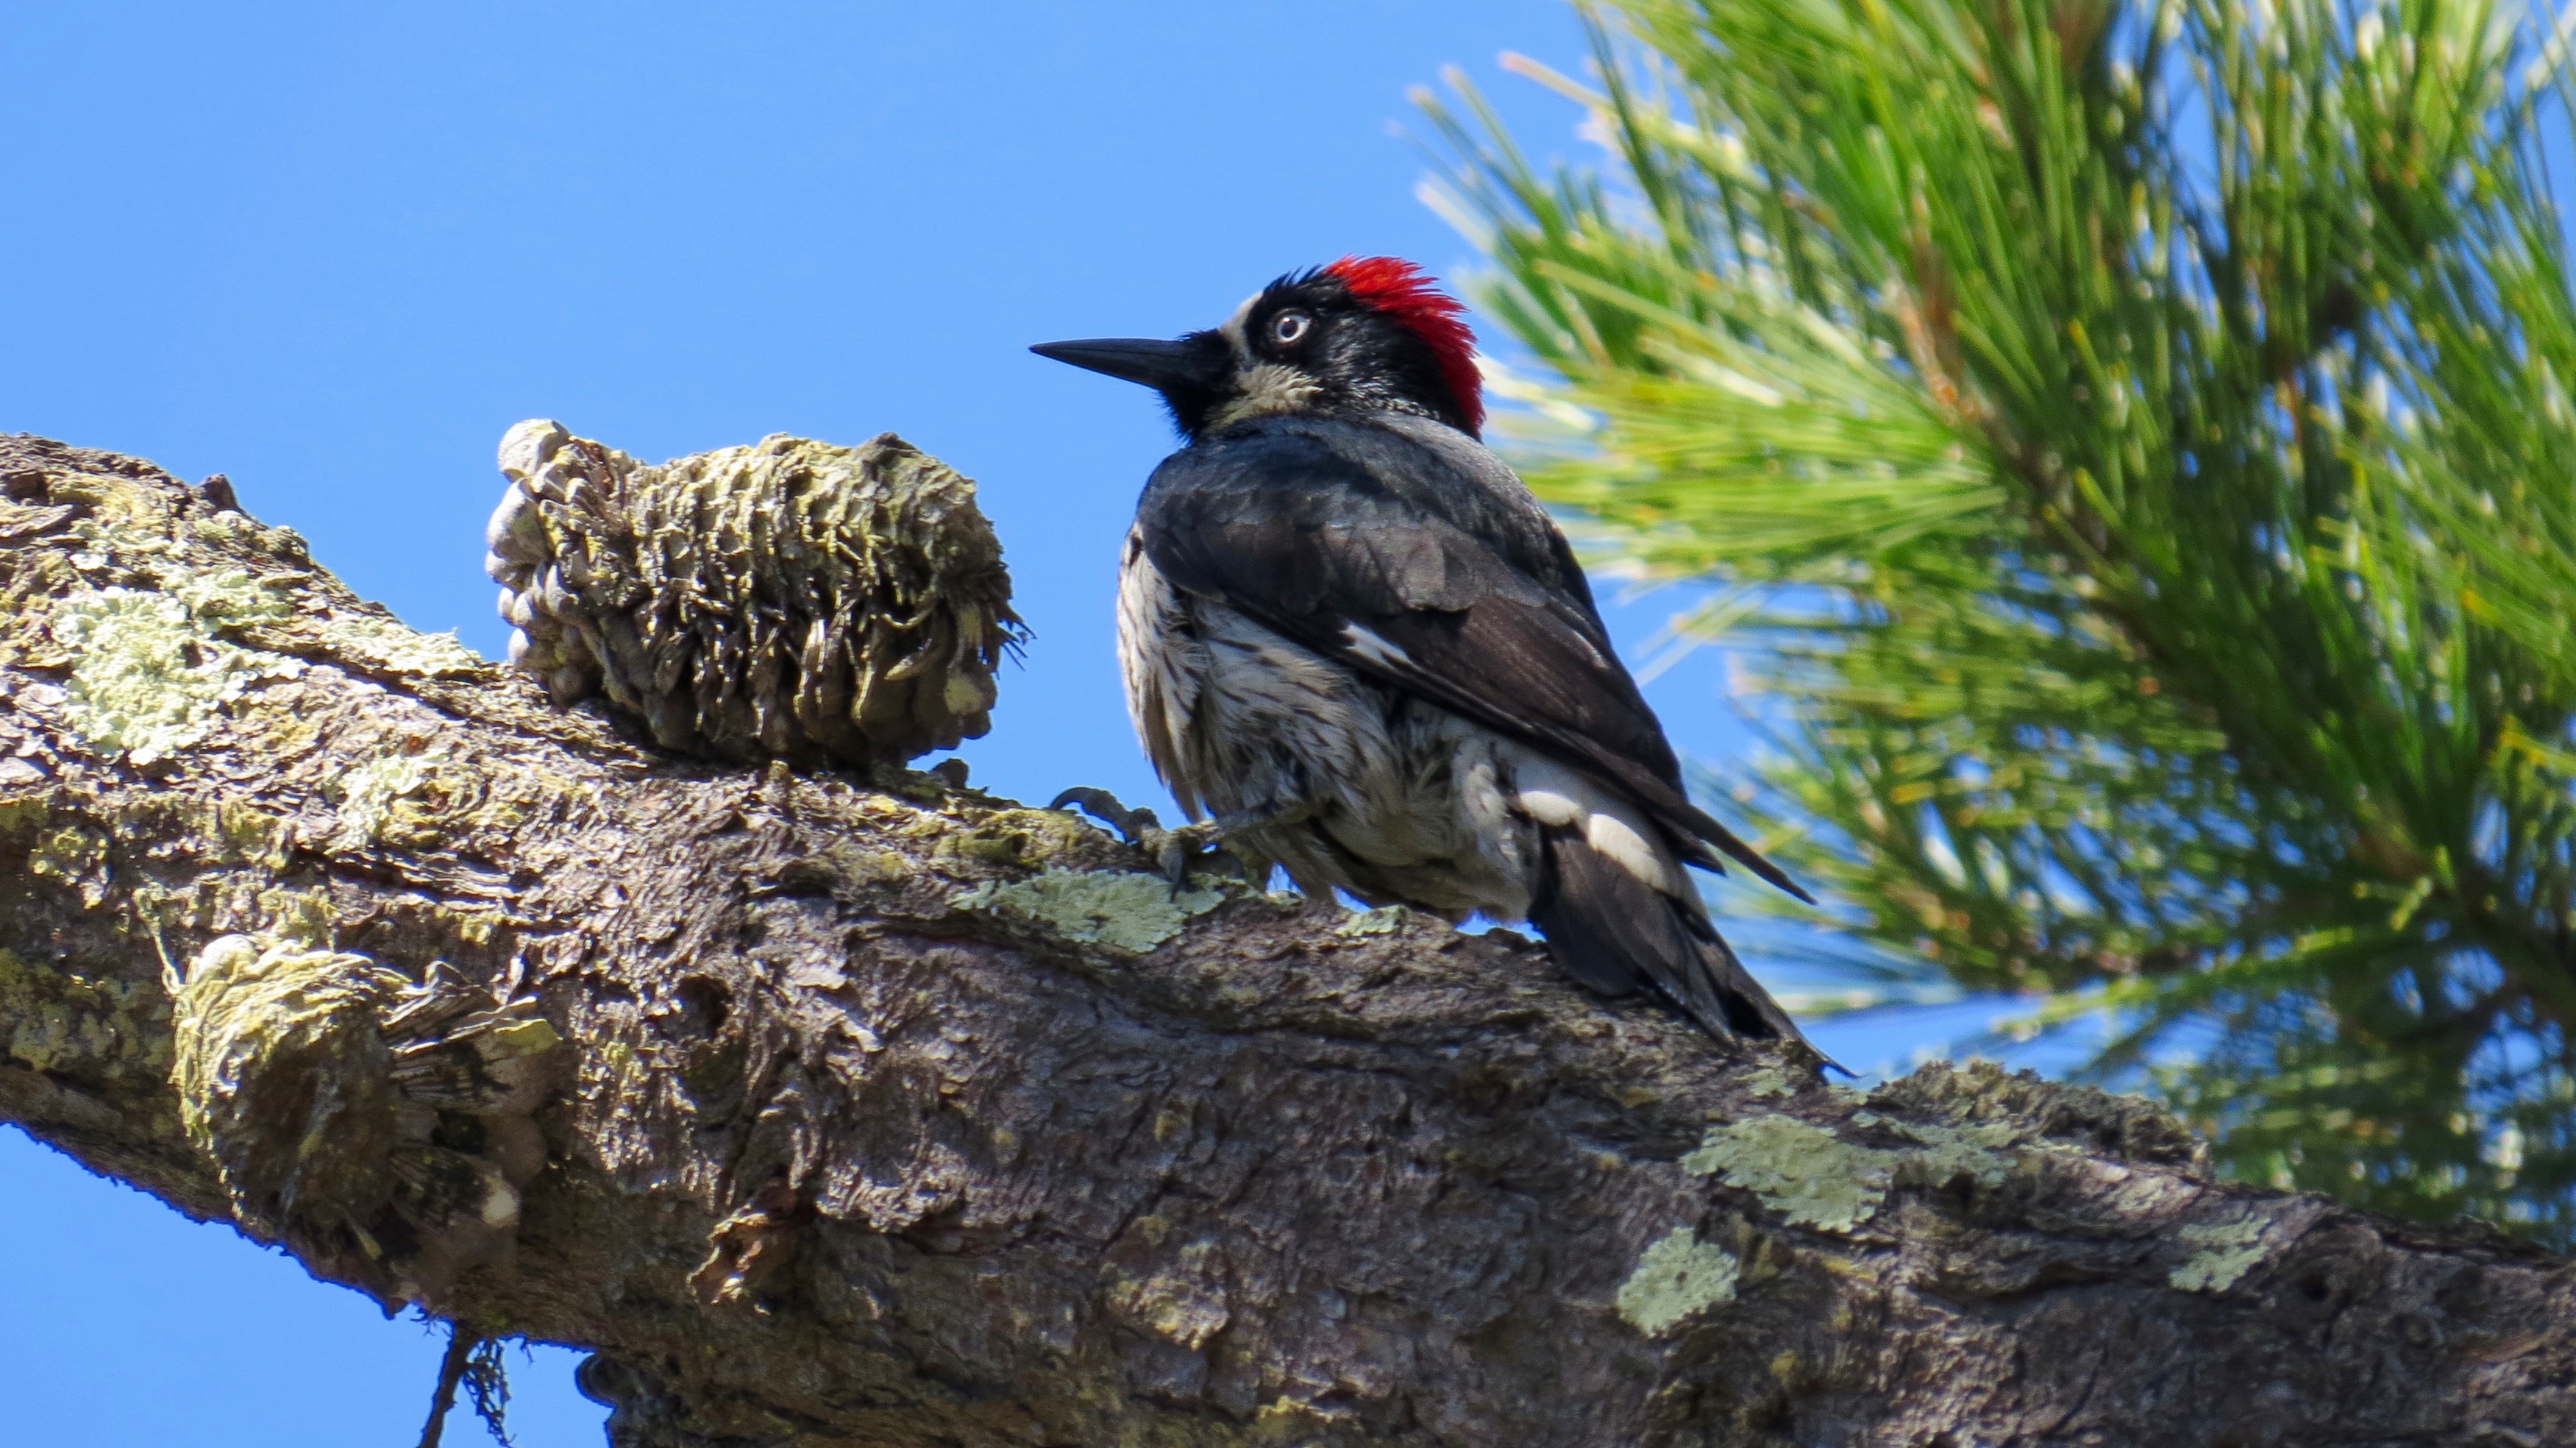 I will miss these crazy noisy clowns called Acorn Woodpeckers who live nearby.  If you ever spot a tall pole or tree riddled with hundreds of holes, each containing an acorn—it's an amazing Woodpecker granary tree. Stop and take a look.